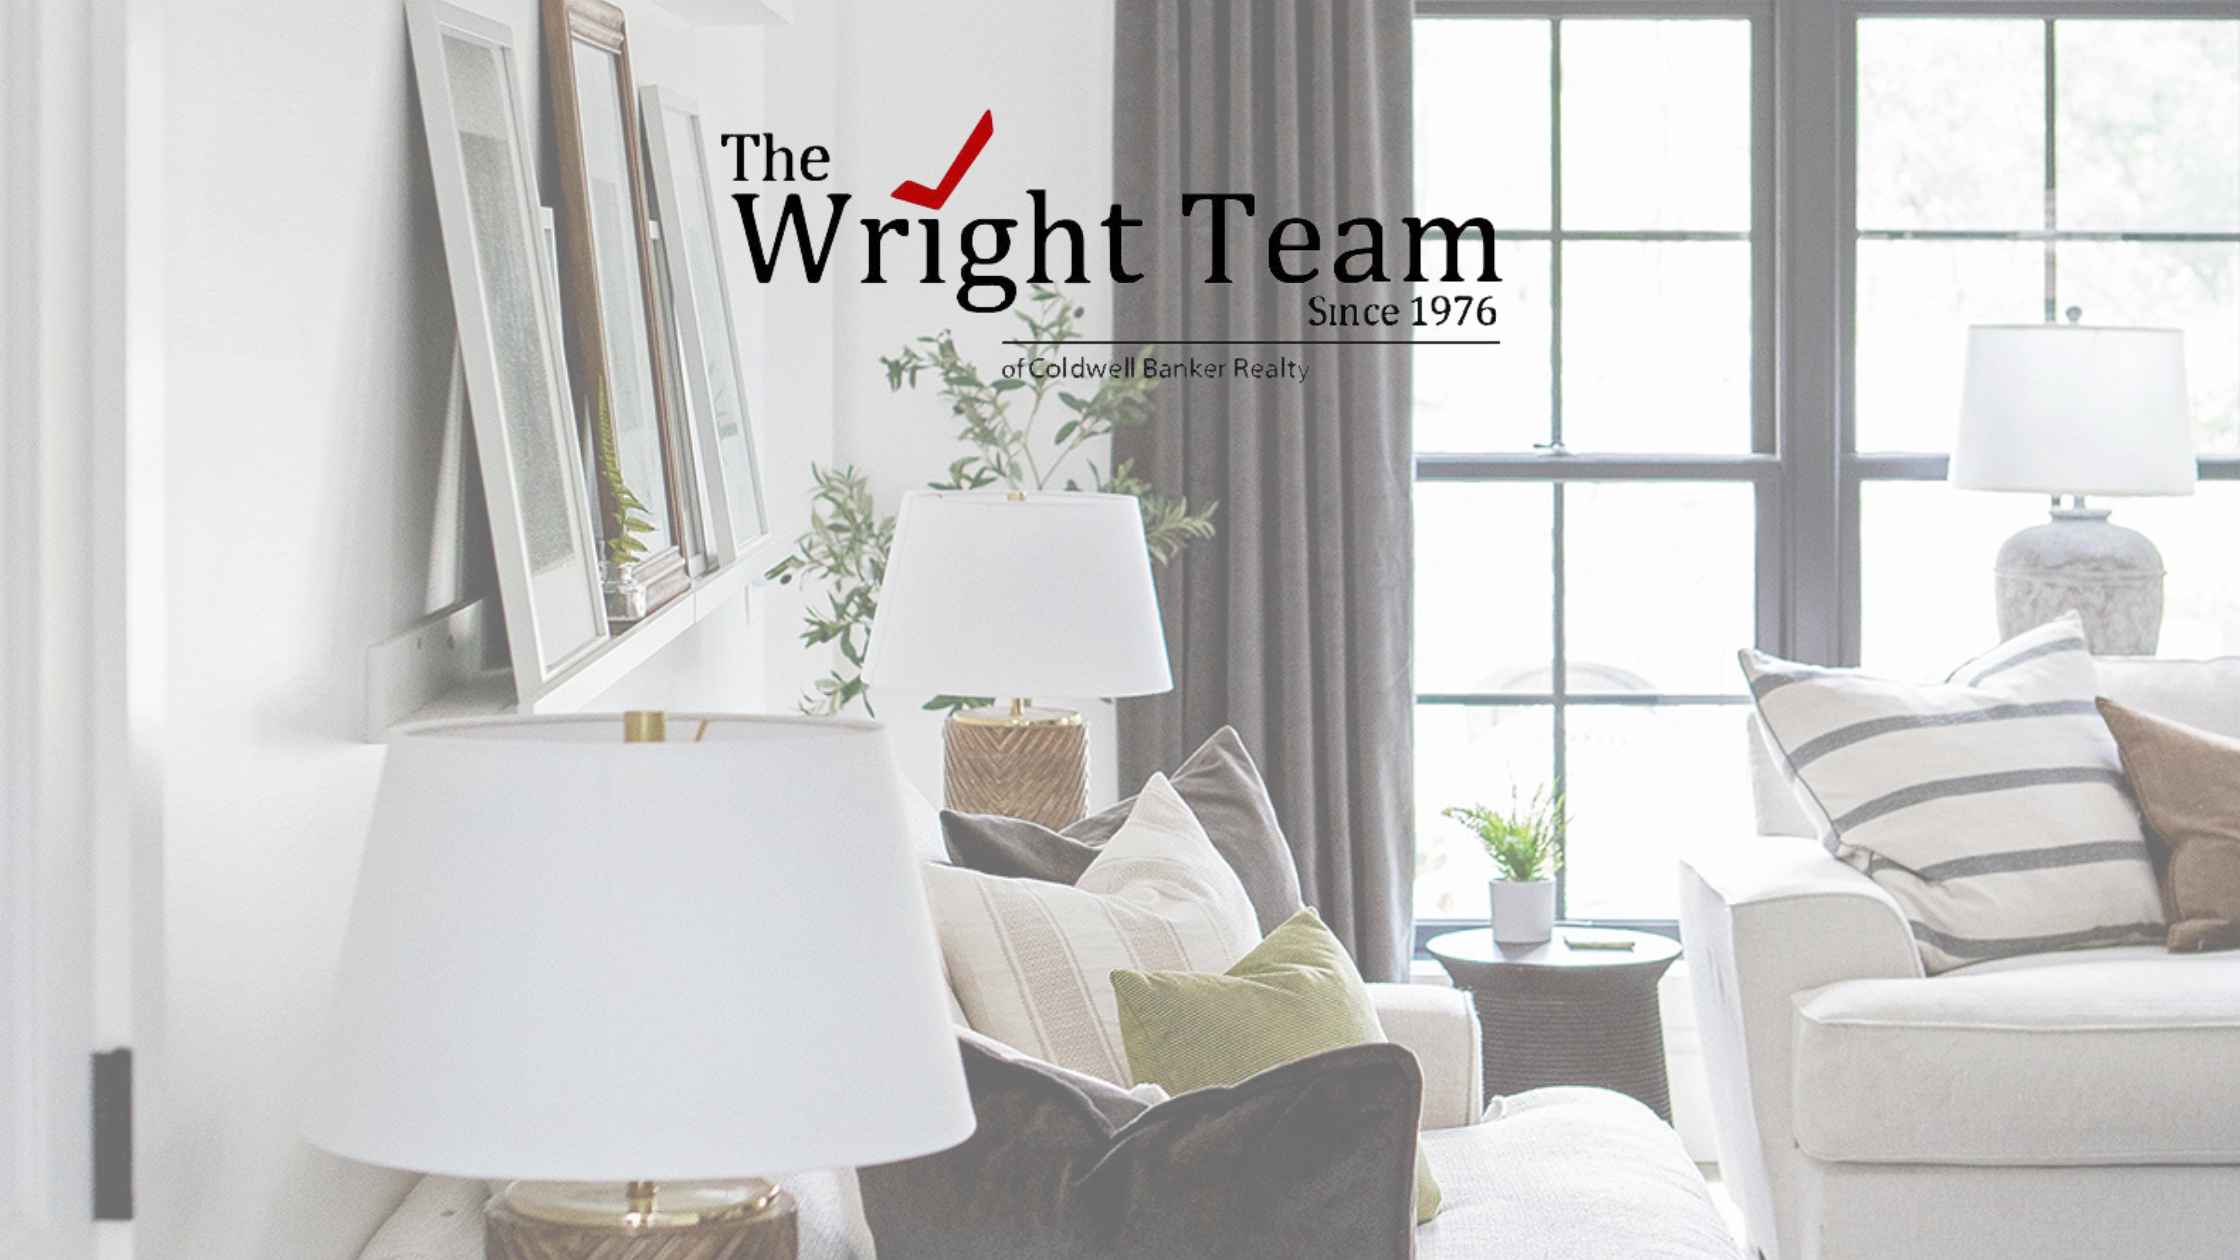 The Wright team of Coldwell Banker Realty, Church Circle